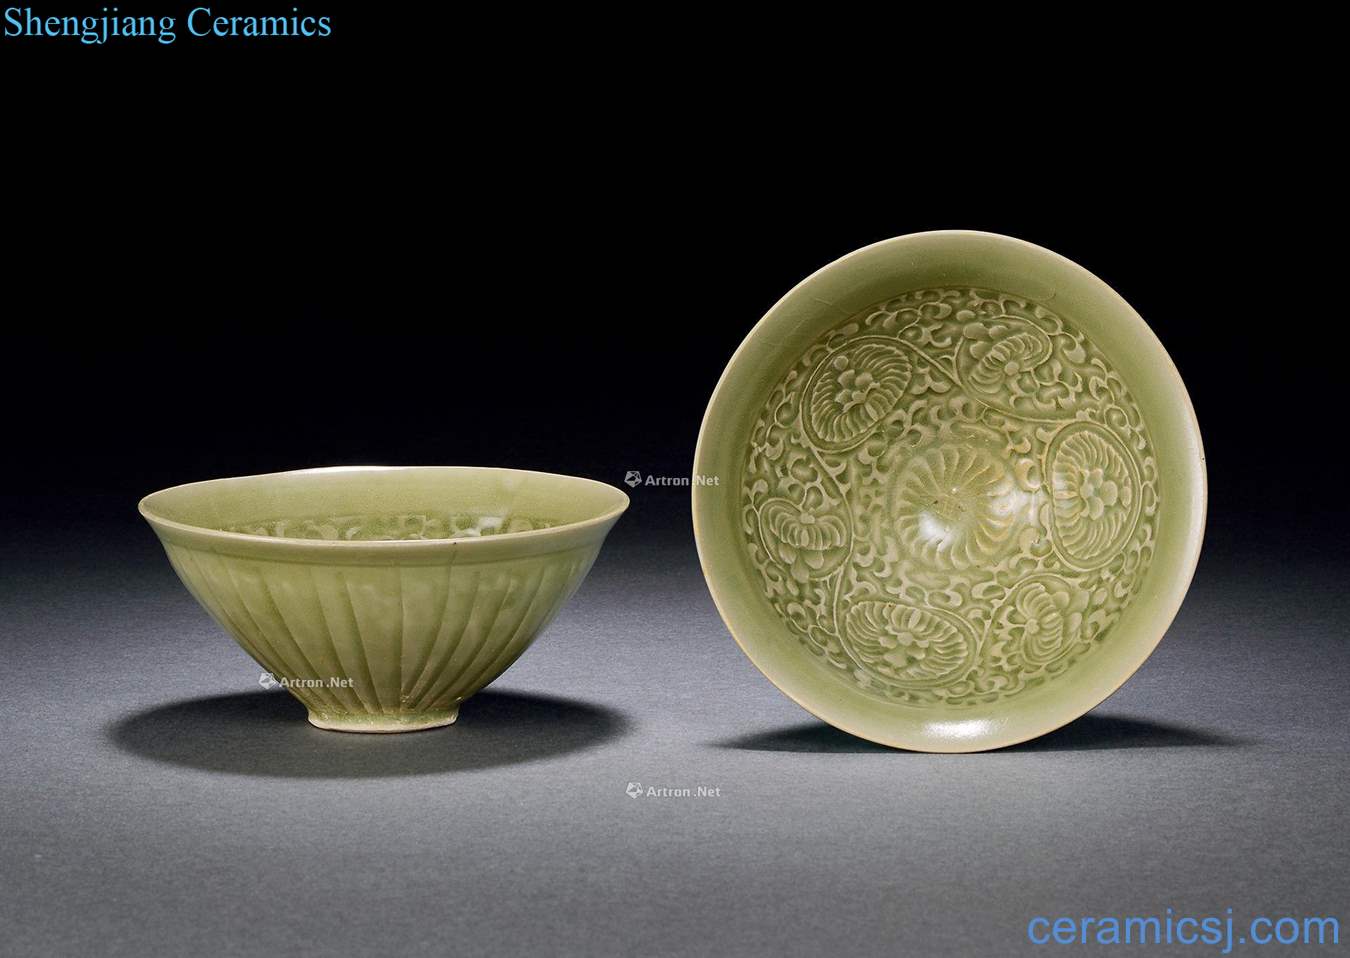 The song dynasty Yao state kiln carved flowers green-splashed bowls (a)